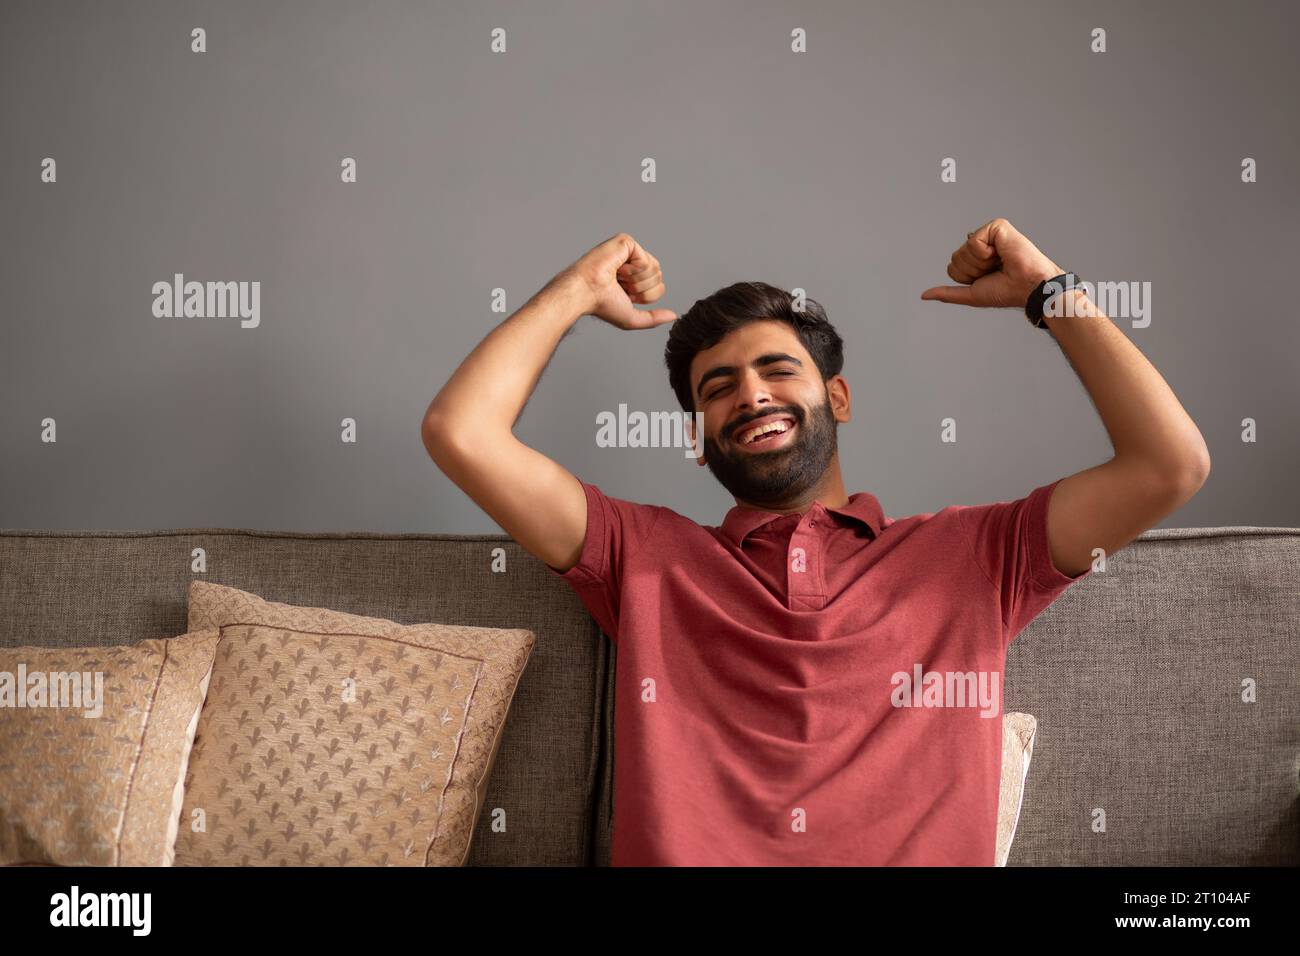 Young man cheering while sitting on sofa in living room Stock Photo